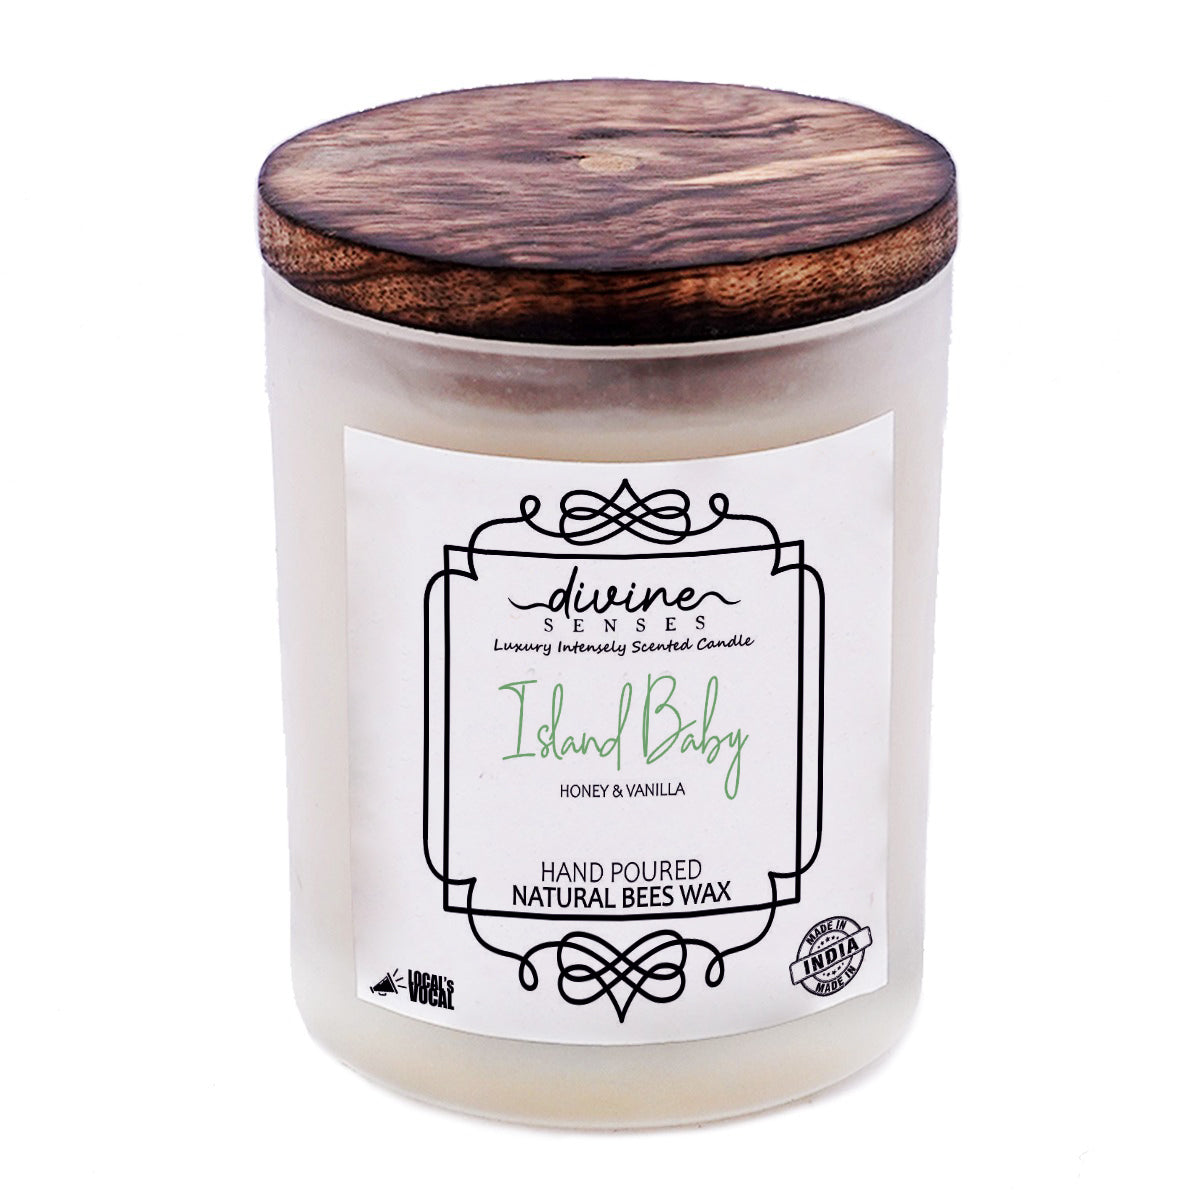 Honey & Vanilla Intensely Scented Natural Beeswax Candle